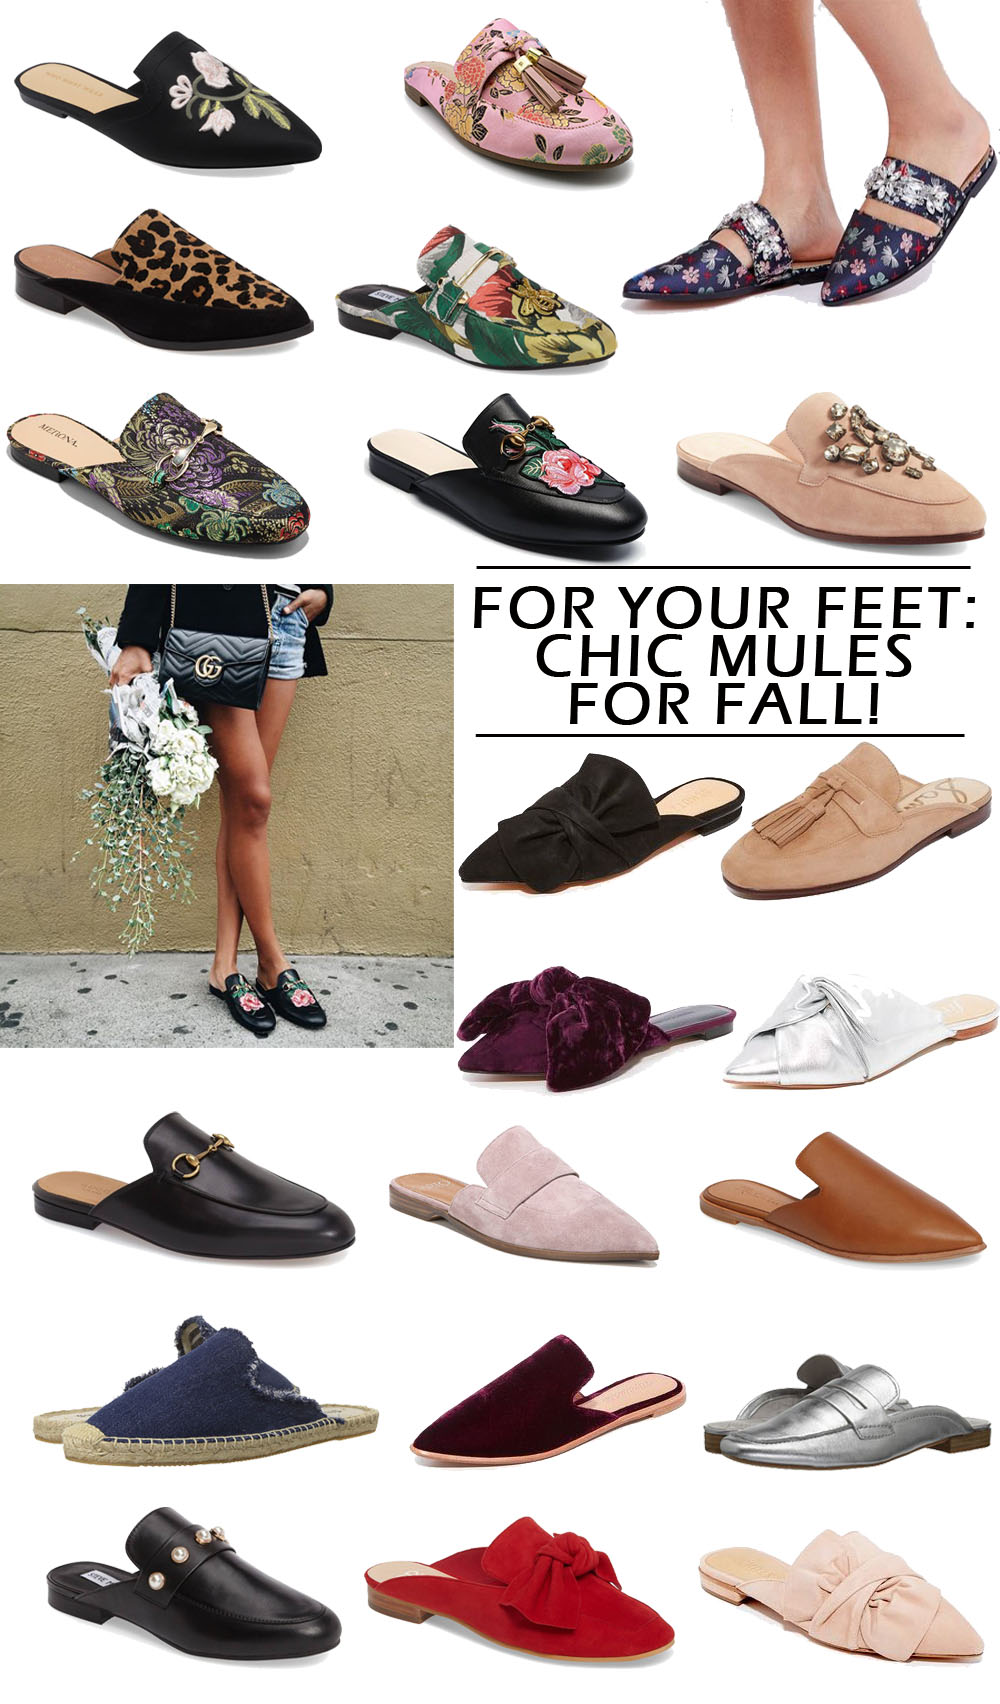 Mules for Fall! 20+ super wearable and chic styles to instantly update your outfit this fall